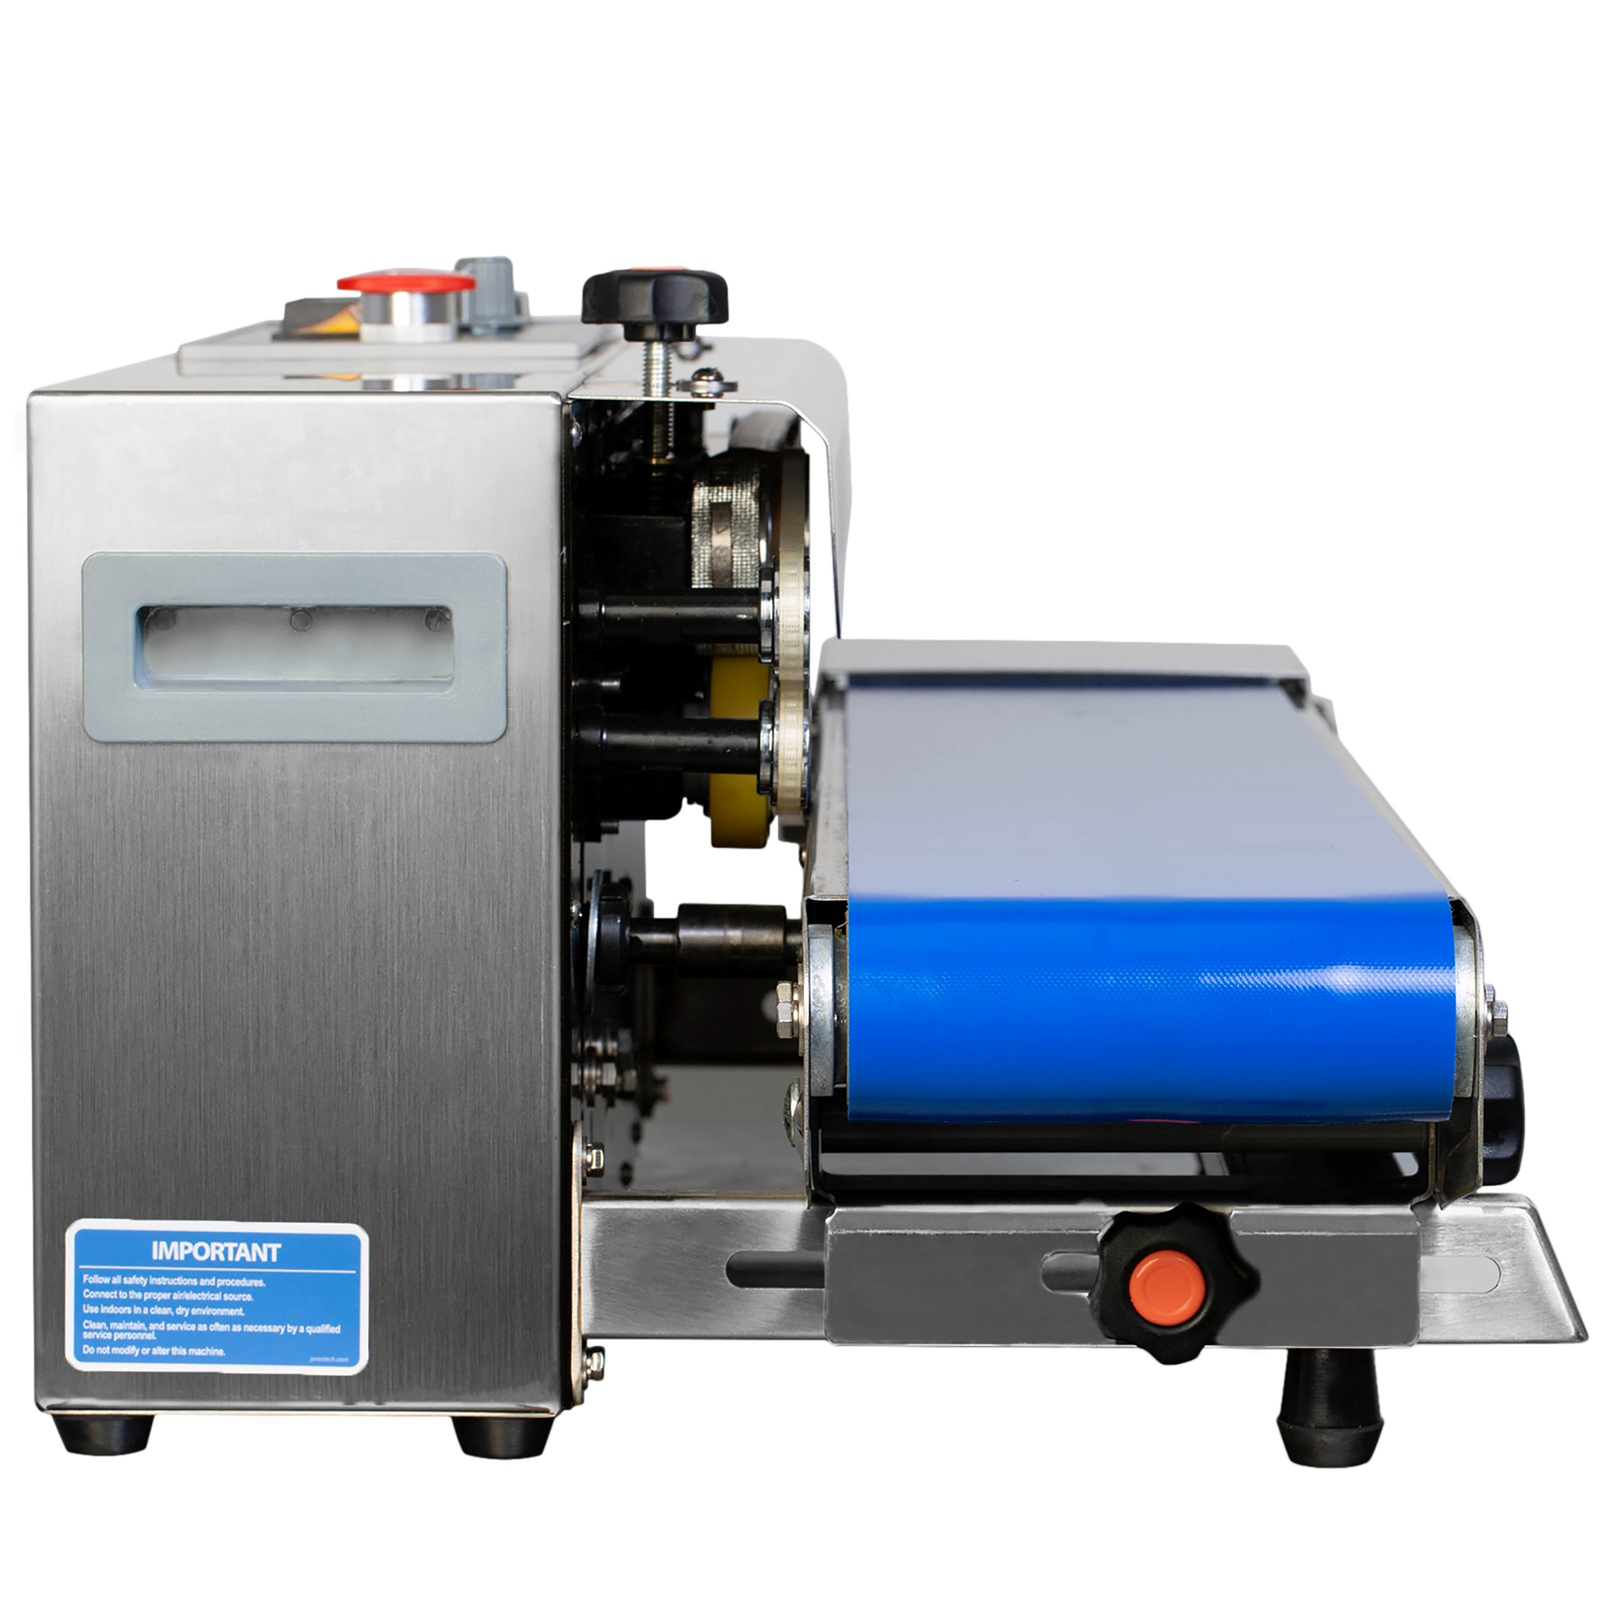 Stainless steel Continuous band sealing machine with blue revolving band set for horizontal applications